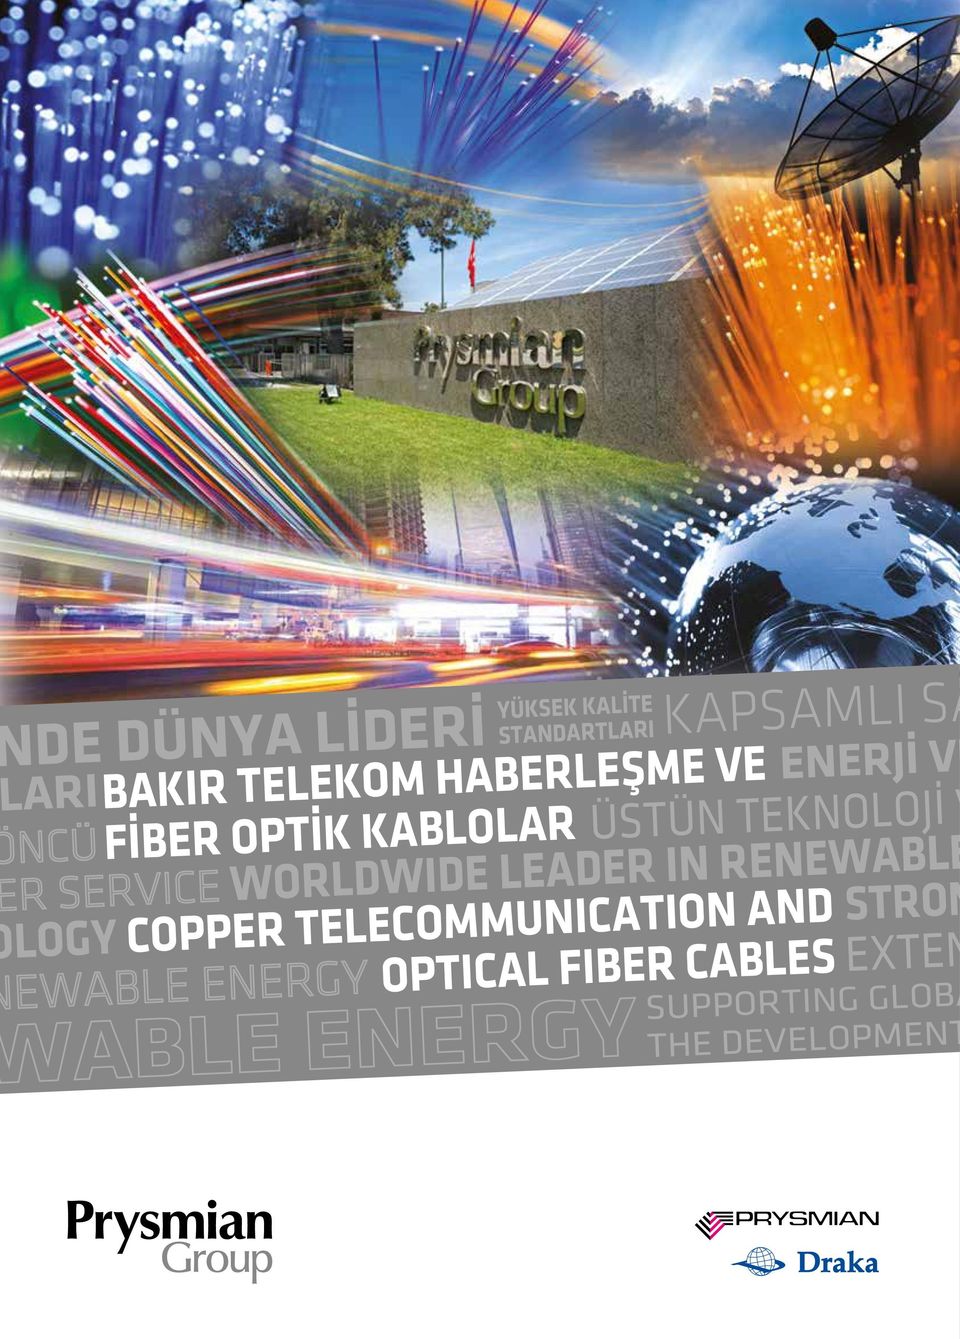 WORLDWIDE LEADER IN RENEWABLE LOGY COPPER TELECOMMUNICATION AND